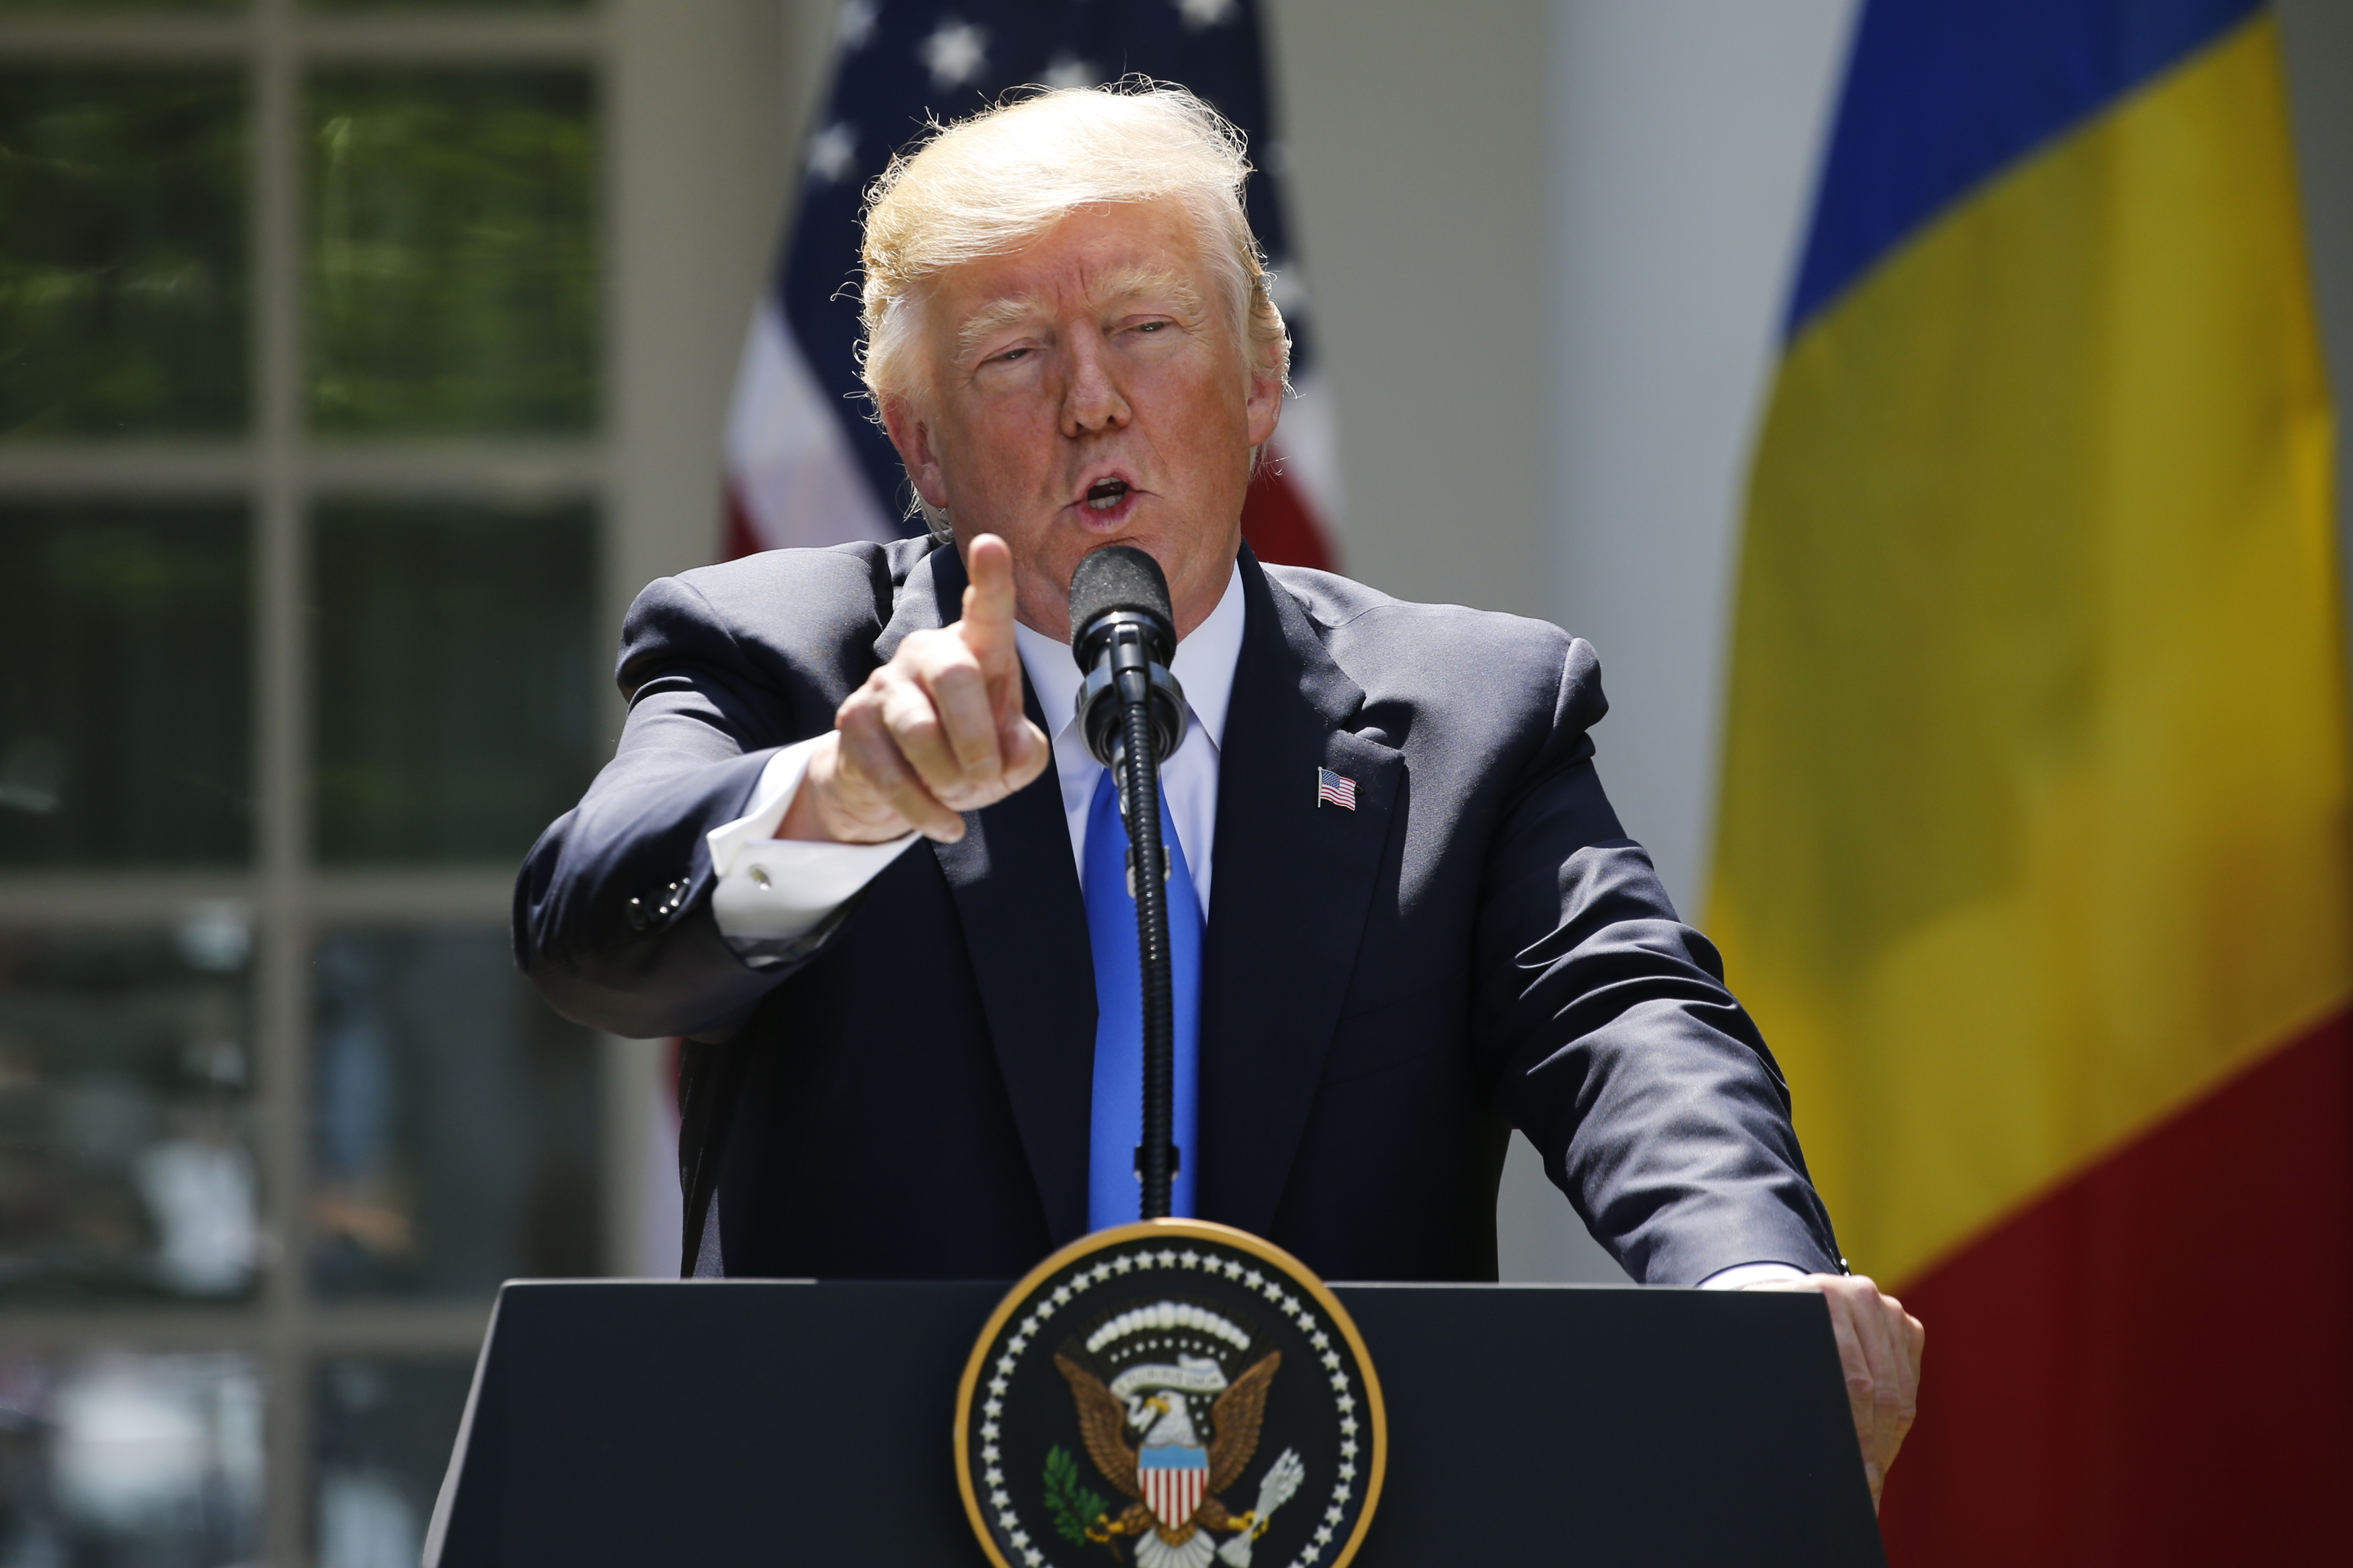 U.S. President Donald Trump reacts to a reporter's question during a joint news conference with Romanian President Klaus Iohannis in the Rose Garden at the White House in Washington, June 9, 2017. (Jonathan Ernst&mdash;Reuters)